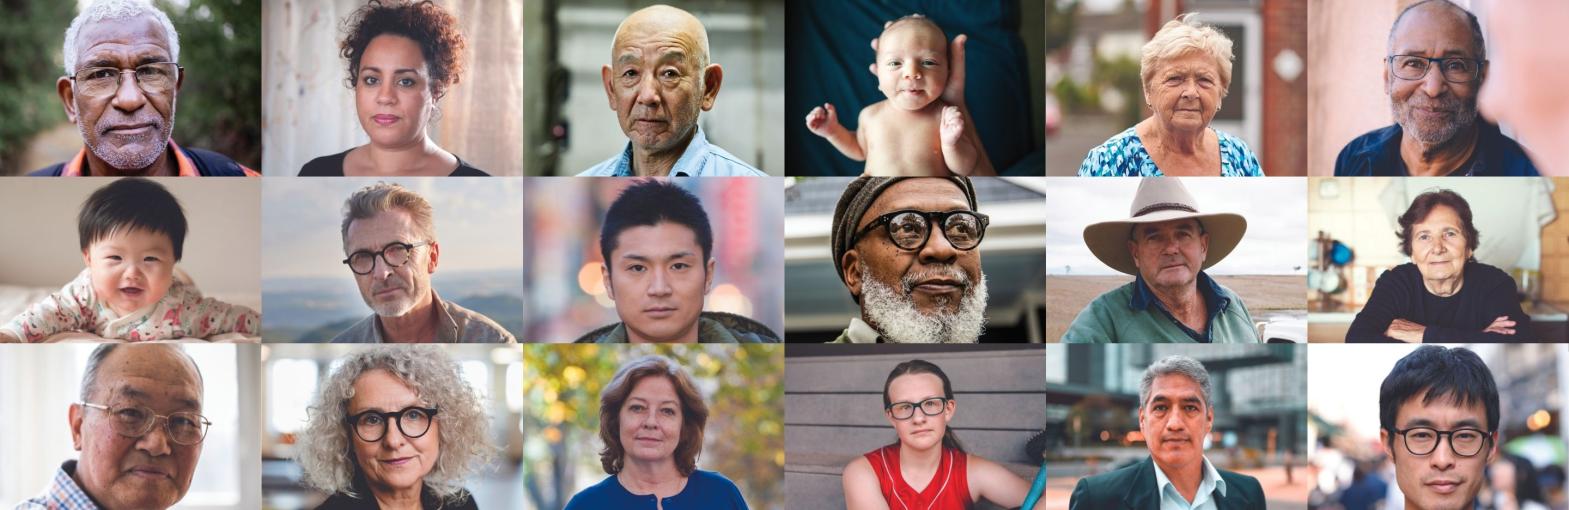 a grid composite image of 18 different people